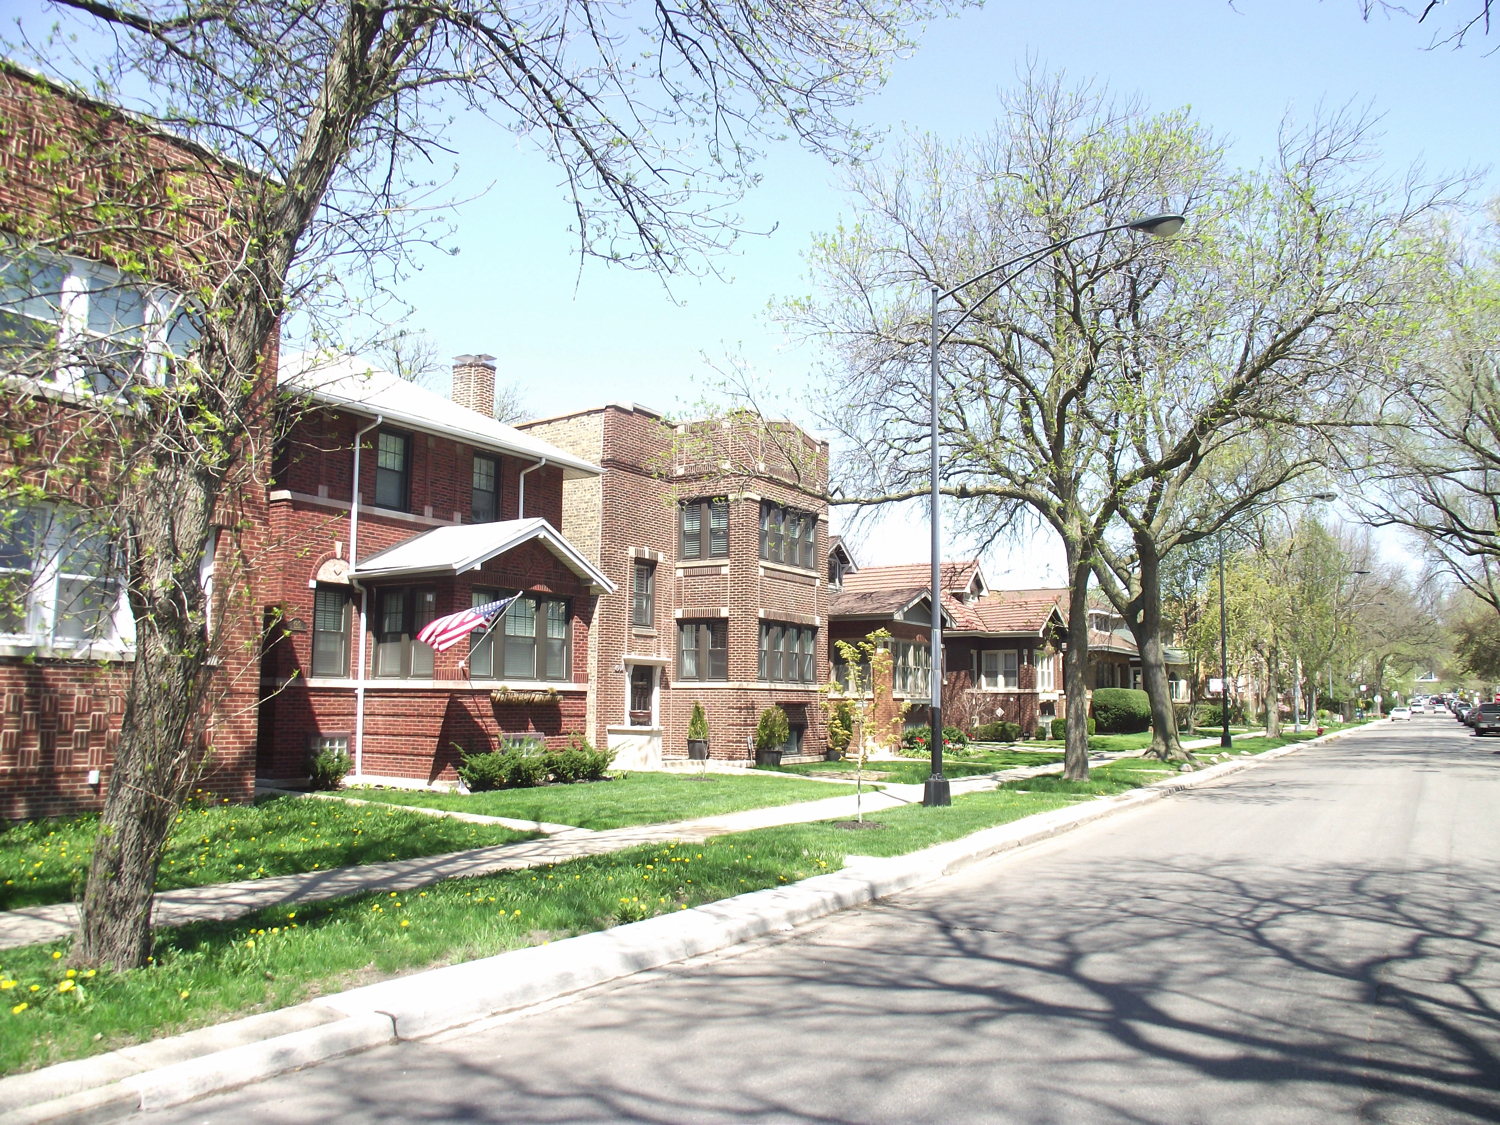 Albany Park Homes For Sale | Albany Park Real Estate, Chicago IL